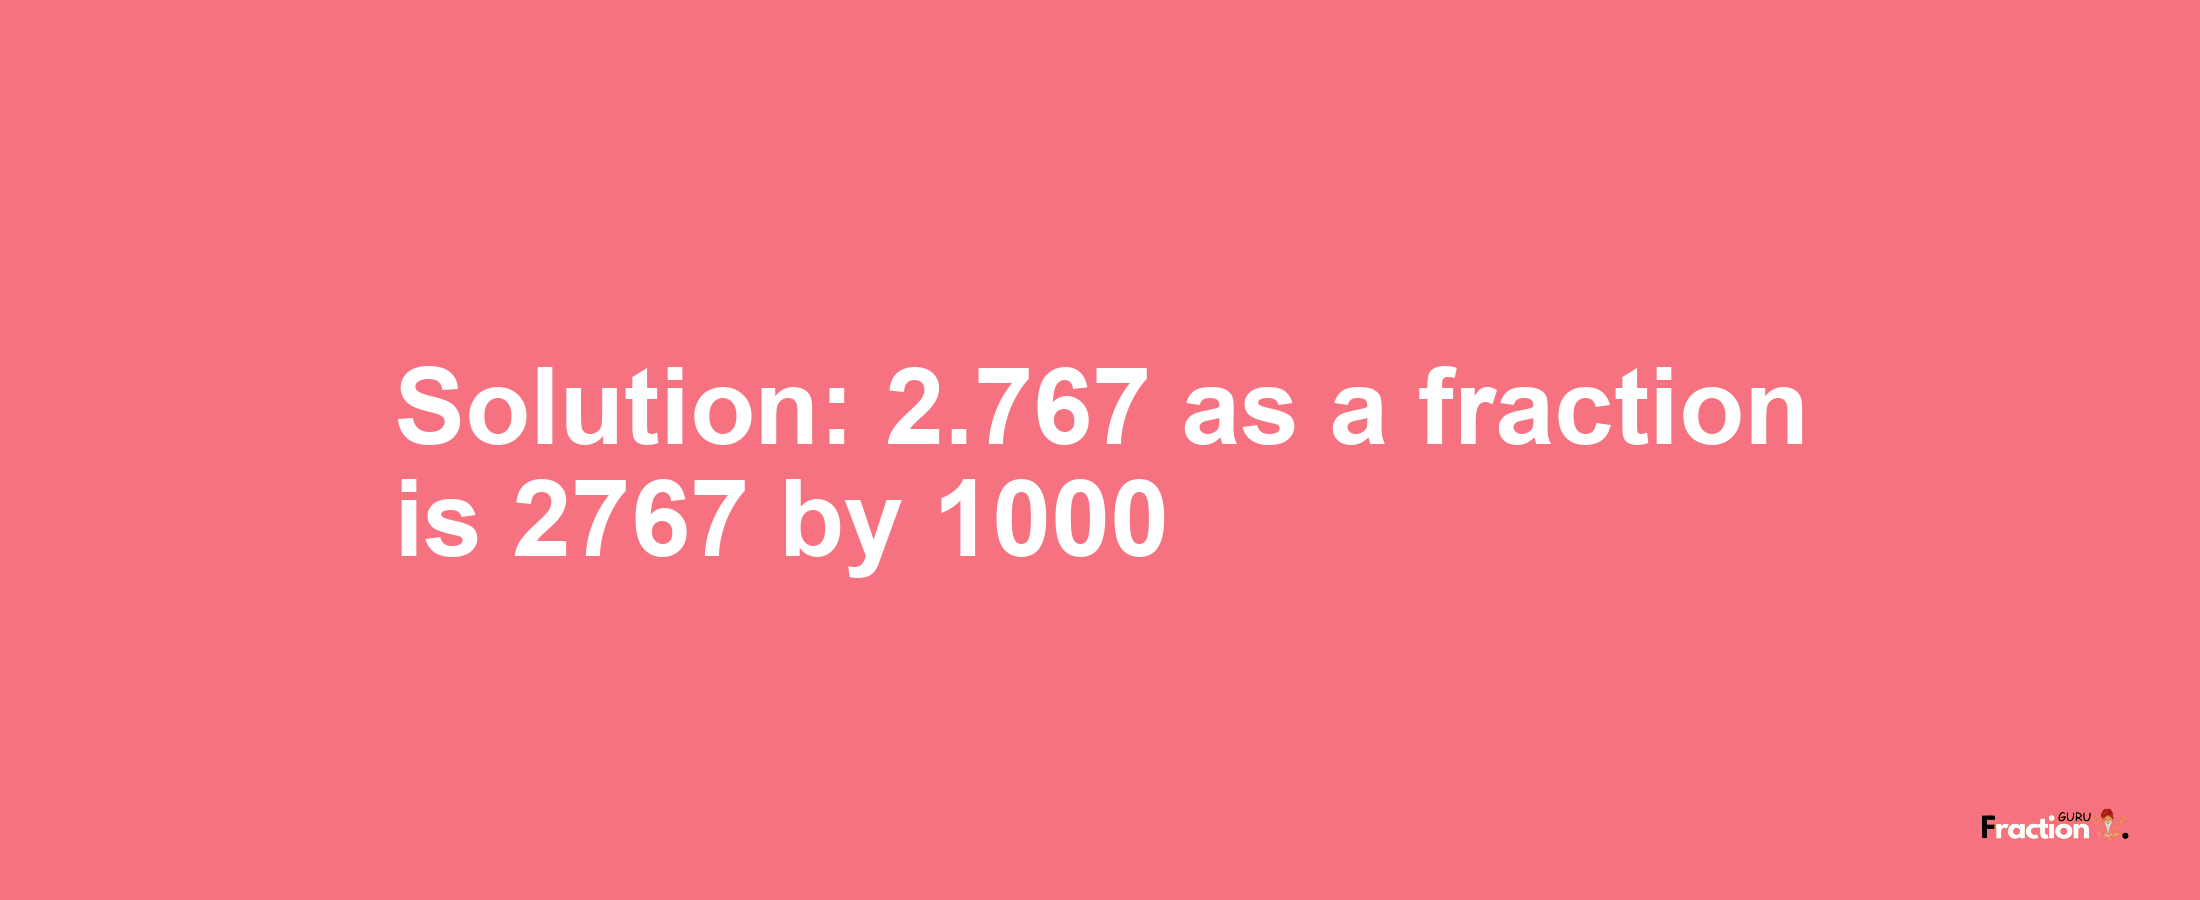 Solution:2.767 as a fraction is 2767/1000